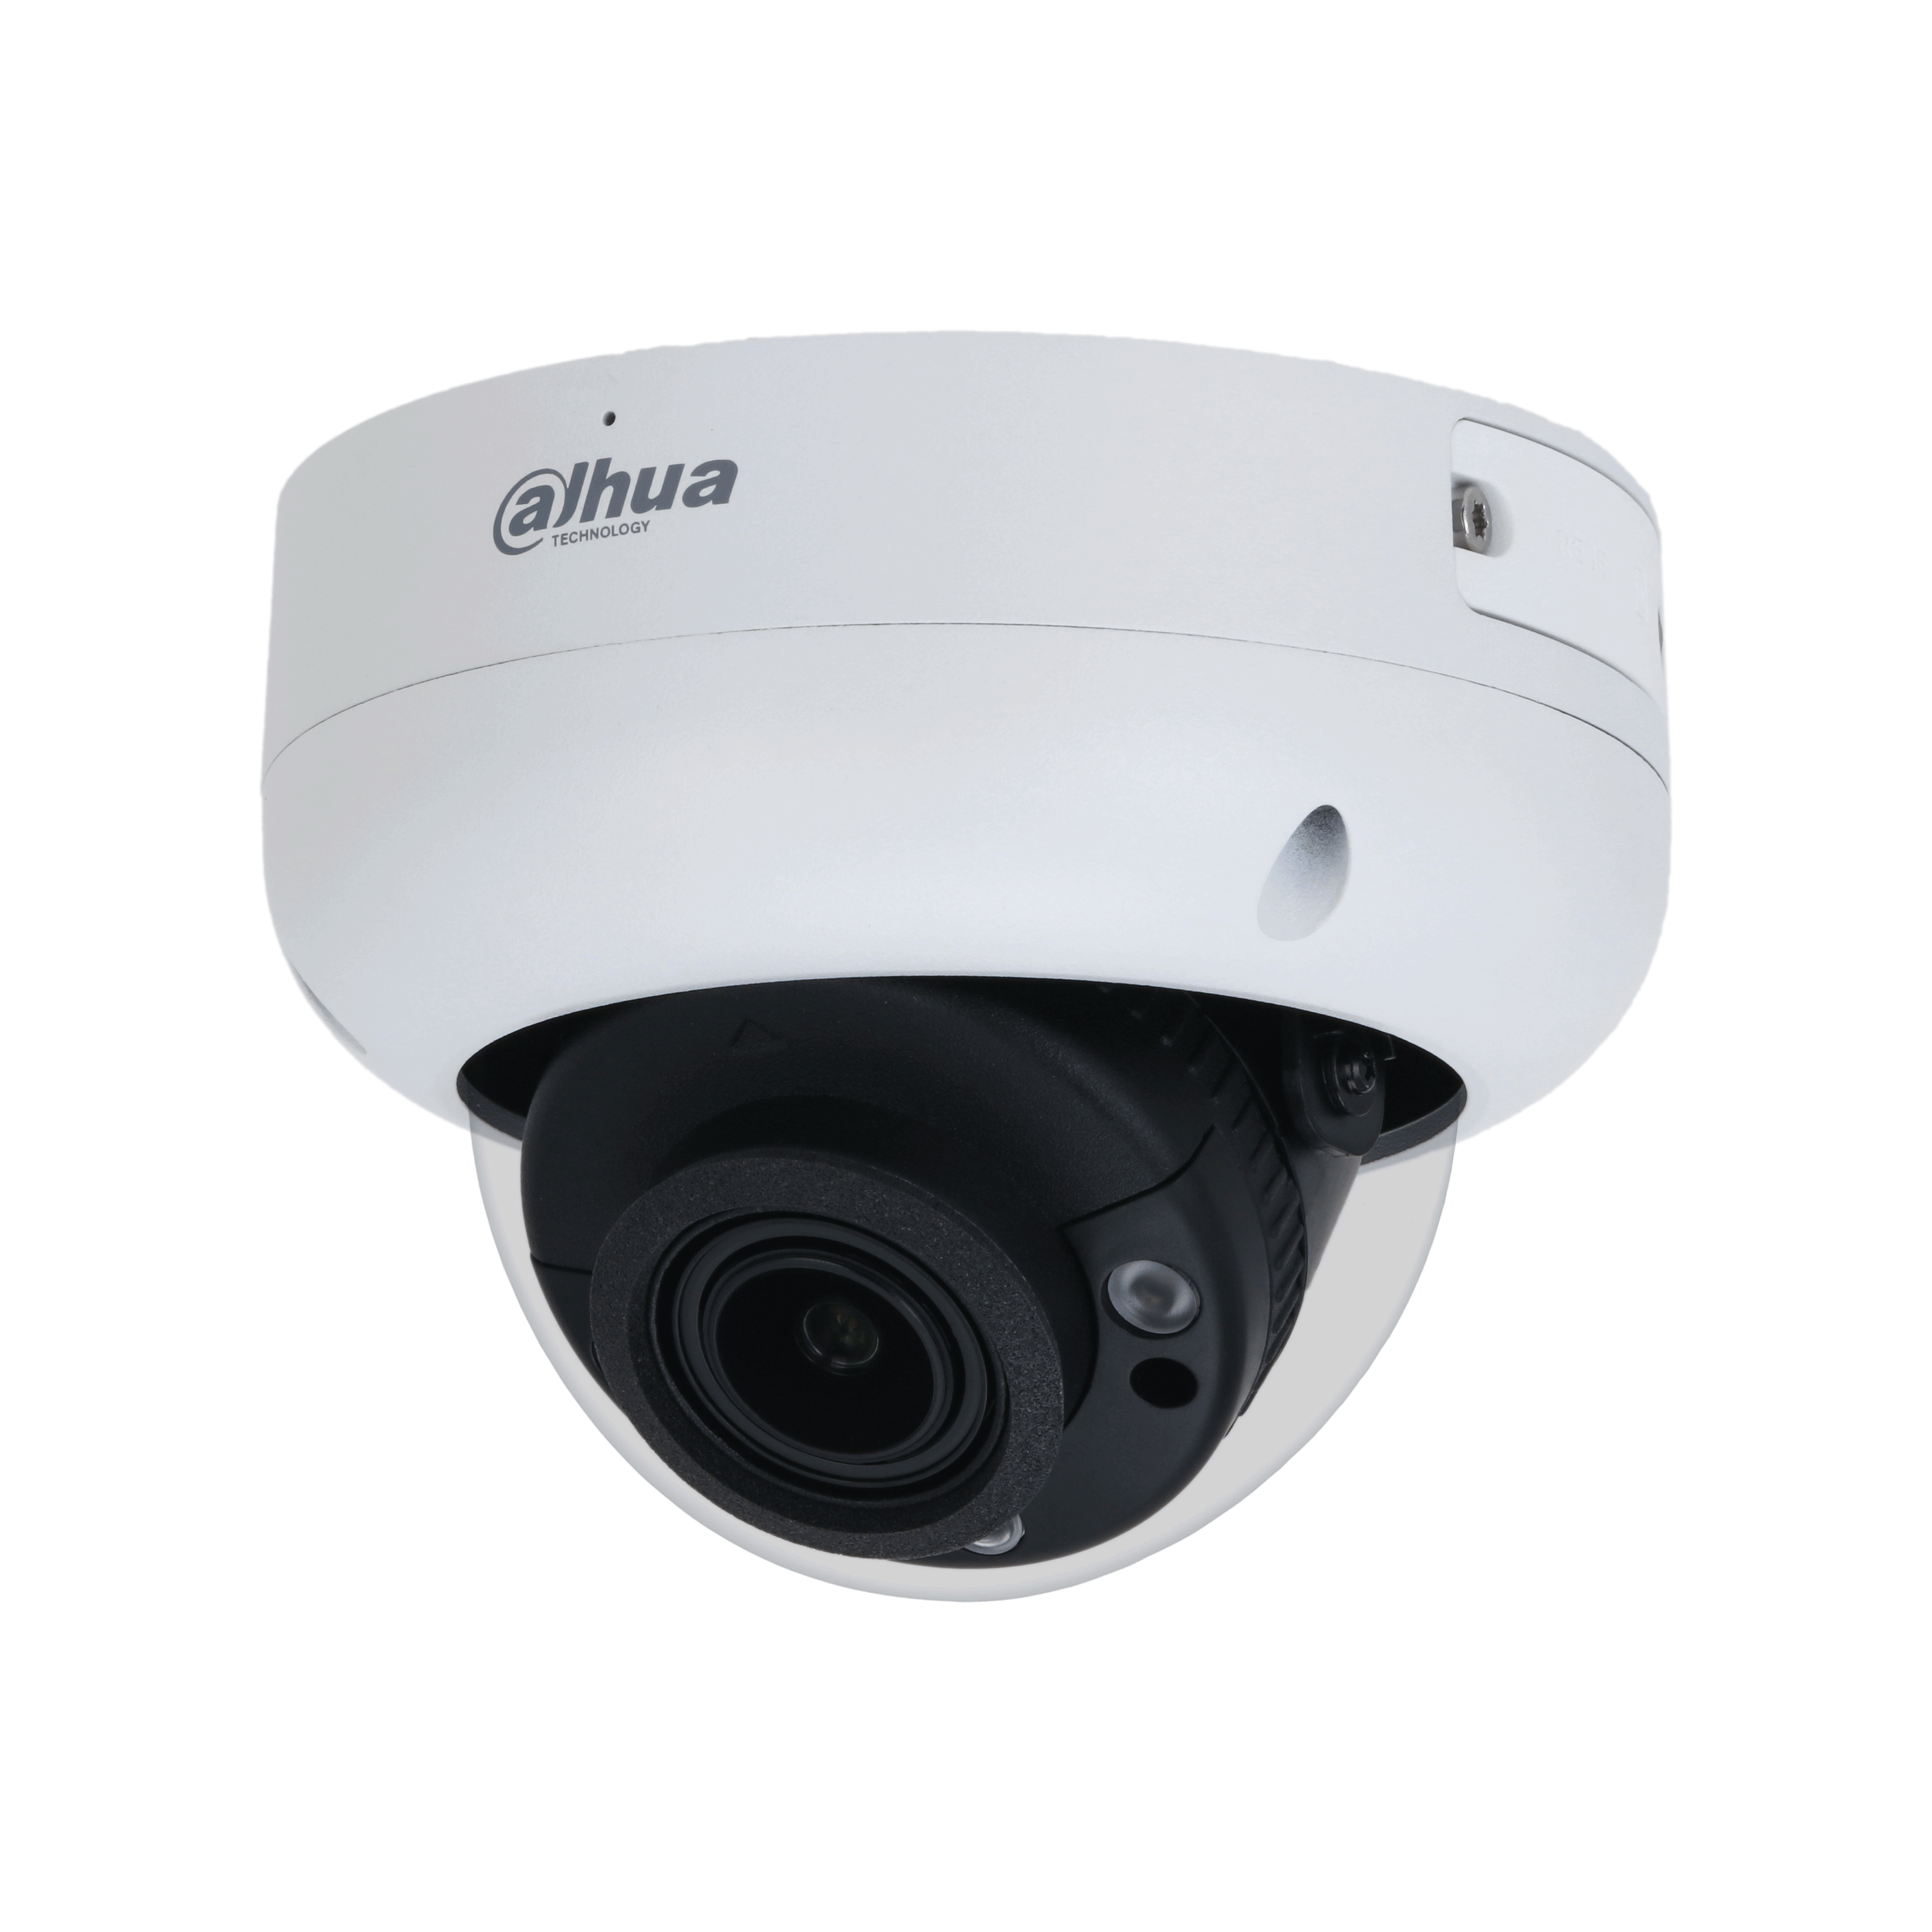 WIZSENSE SERIES IP CAMERA WHITE 4MP H.264/4+/5/5+ DOME 120 WDR METAL 2.7-13.5MM MOTORISED LENS 5X ZOOM IR 40M POE IP67 BUILT IN MIC AUDIO IN AUDIO OUT 1 x ALARM IN 1 x ALARM OUT SUPPORT UP TO 256GB SD IK10 12VDC